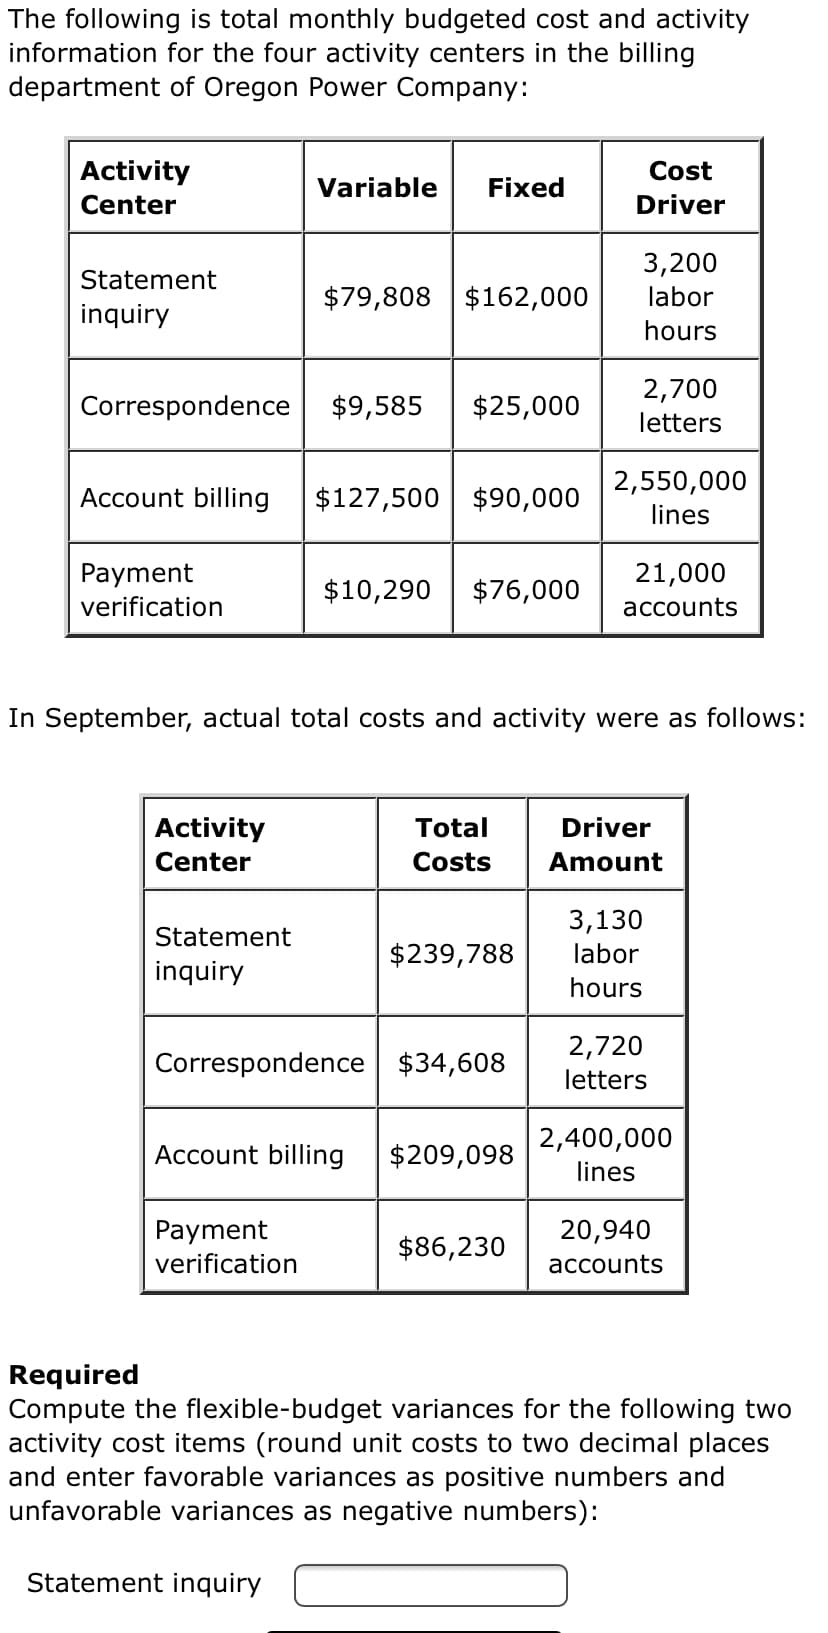 The following is total monthly budgeted cost and activity
information for the four activity centers in the billing
department of Oregon Power Company:
Activity
Cost
Variable
Fixed
Center
Driver
3,200
Statement
$79,808 $162,000
labor
inquiry
hours
2,700
Correspondence
$9,585
$25,000
letters
2,550,000
Account billing
$127,500 $90,000
lines
Payment
verification
21,000
$10,290
$76,000
accounts
In September, actual total costs and activity were as follows:
Activity
Total
Driver
Center
Costs
Amount
3,130
Statement
$239,788
labor
inquiry
hours
2,720
Correspondence $34,608
letters
2,400,000
Account billing
$209,098
lines
Payment
verification
20,940
$86,230
асcounts
Required
Compute the flexible-budget variances for the following two
activity cost items (round unit costs to two decimal places
and enter favorable variances as positive numbers and
unfavorable variances as negative numbers):
Statement inquiry
